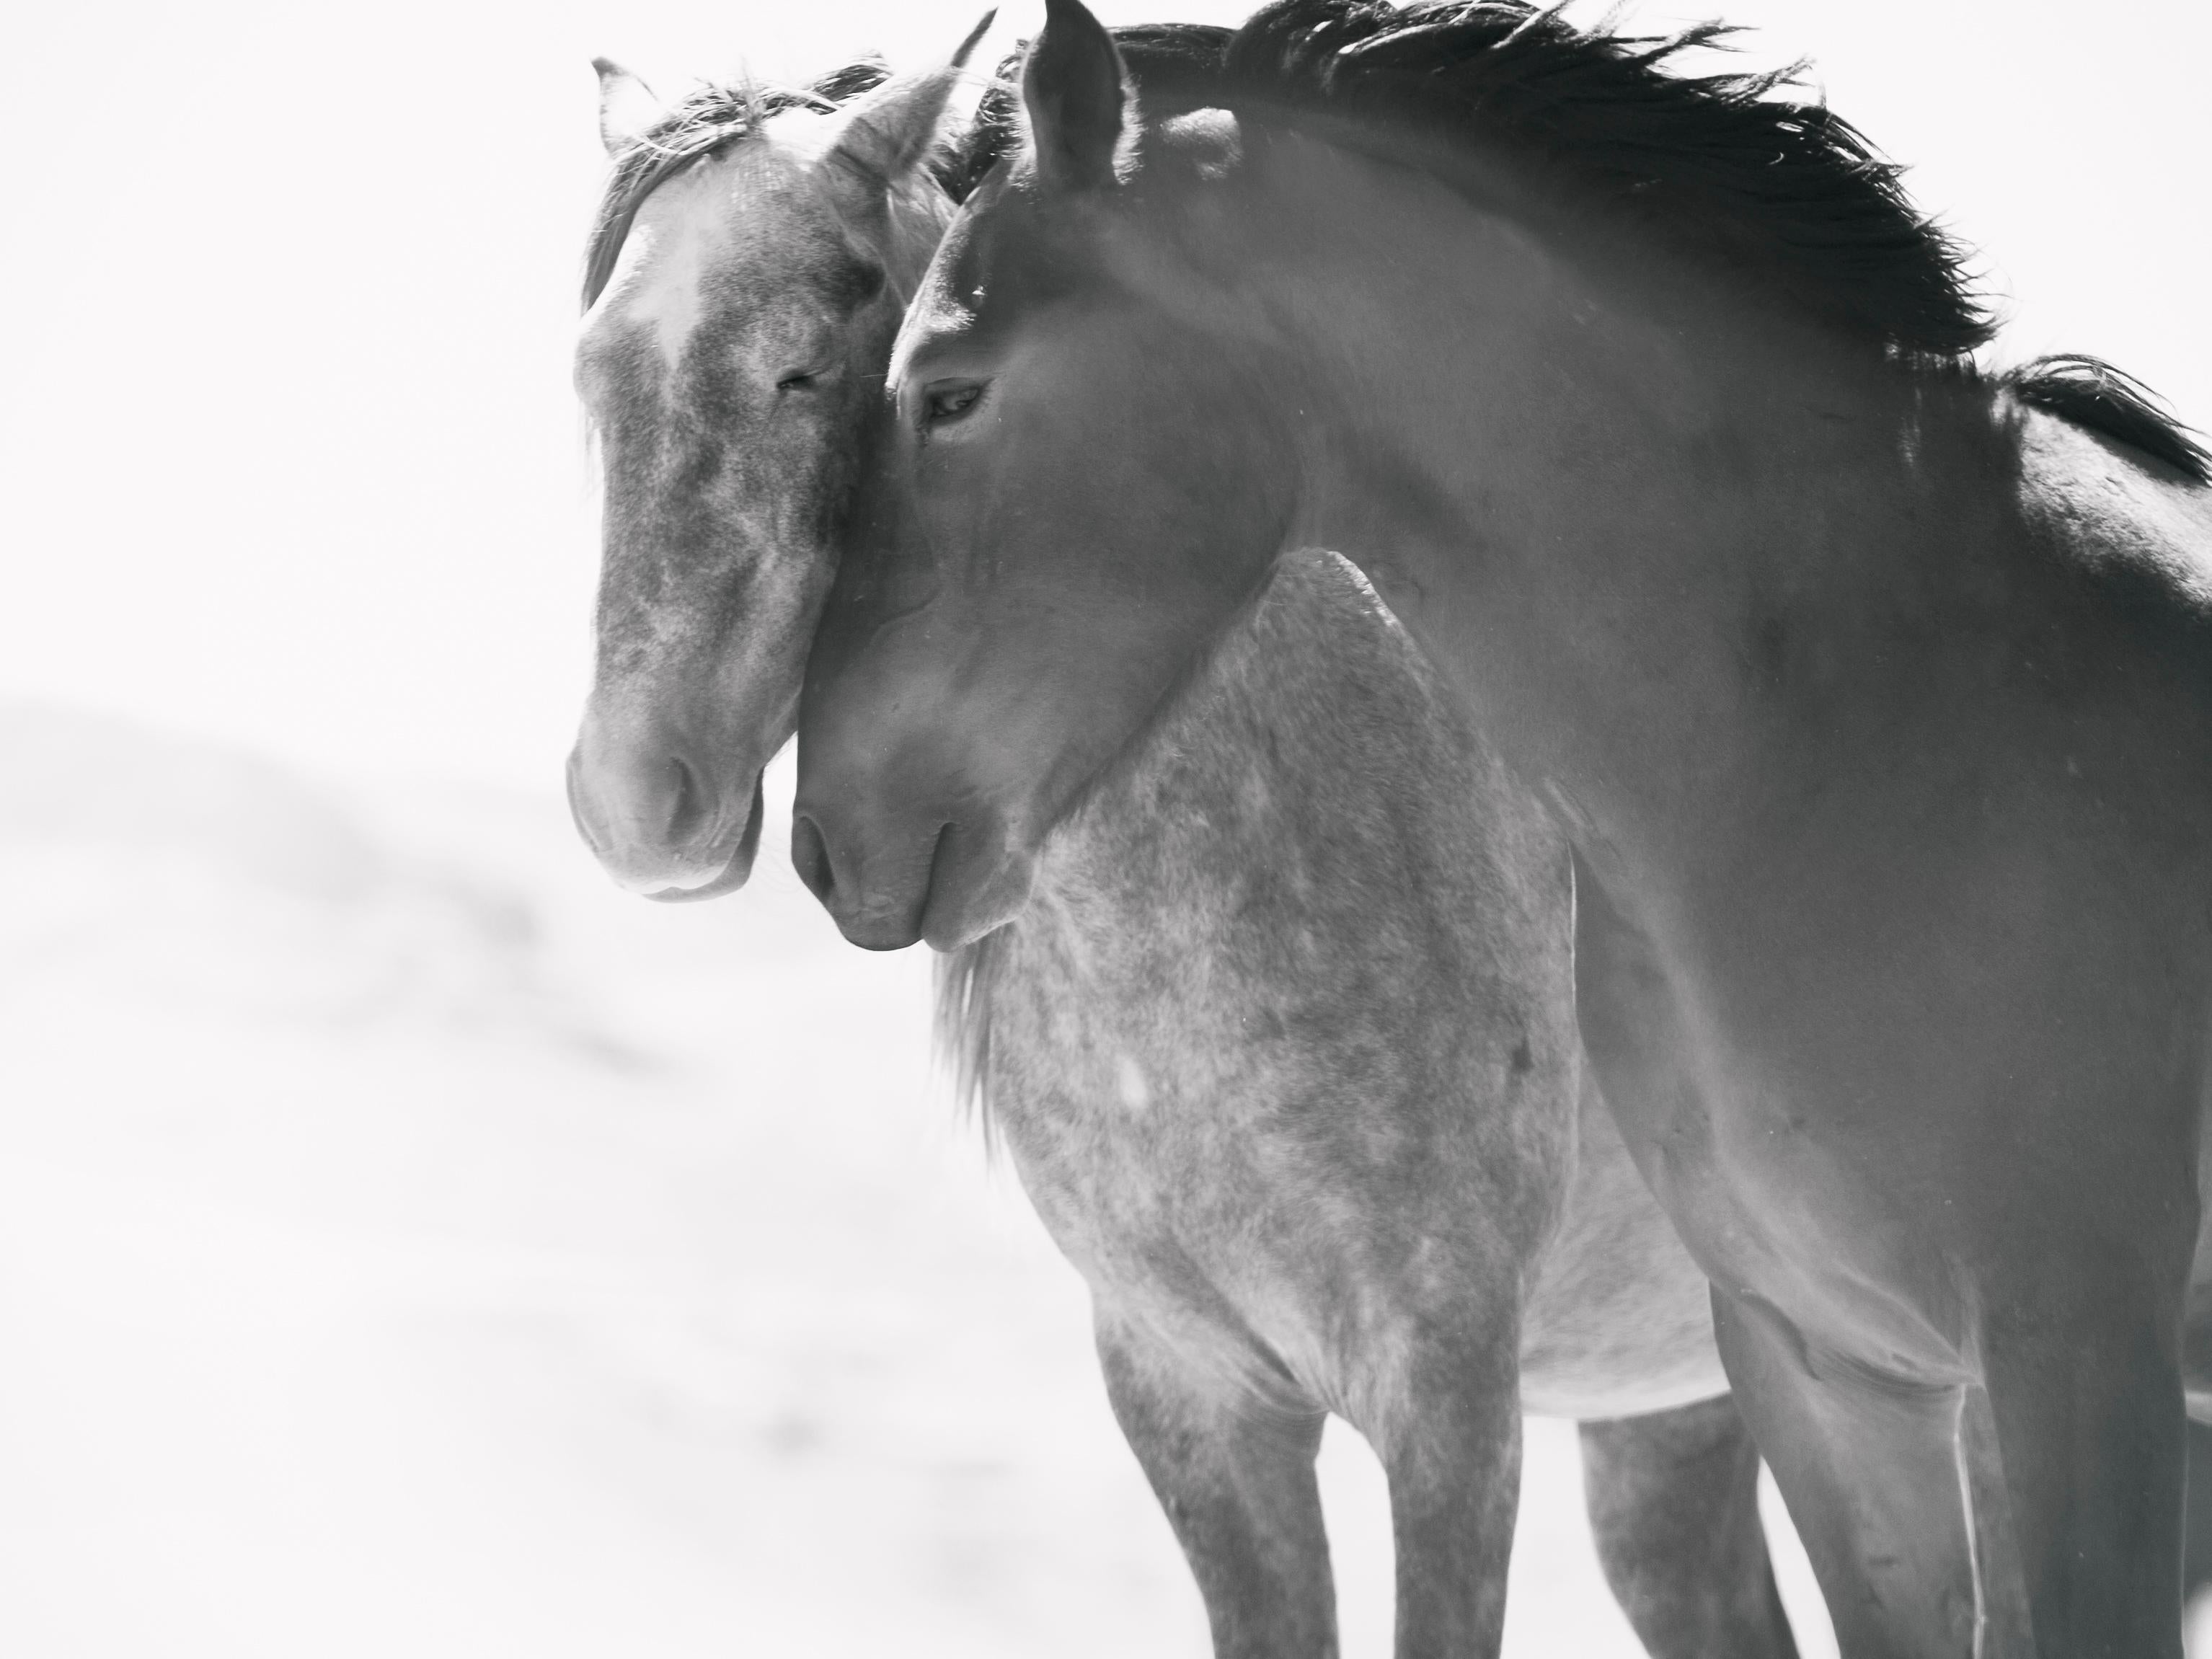 Shane Russeck Animal Print - "Soulmates"  28x40 Black and White Photography Wild Horses Mustangs Photograph 